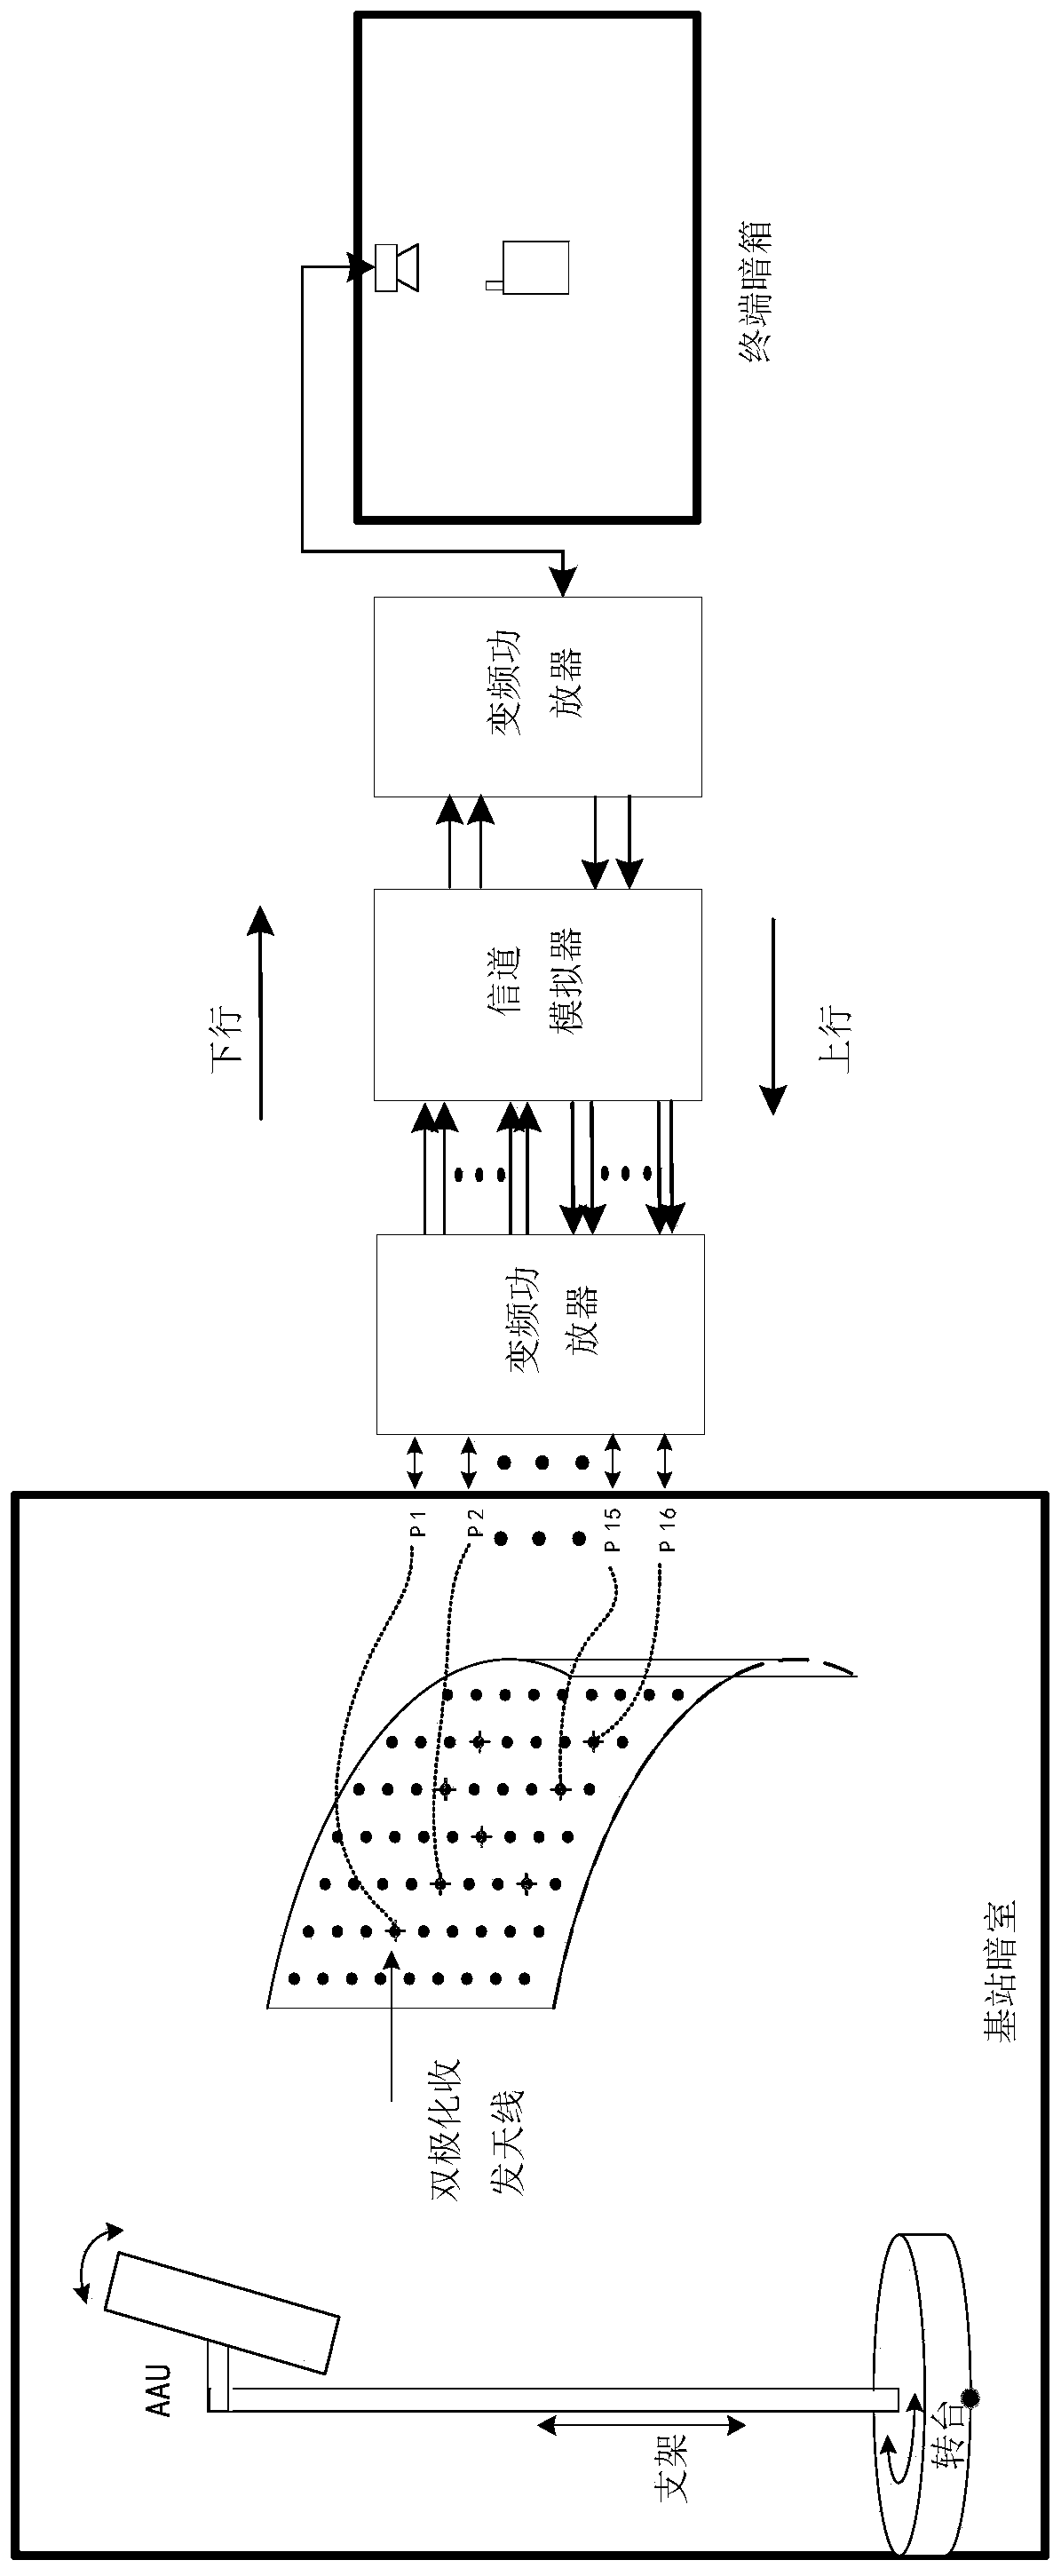 Base station oriented millimeter wave end-to-end performance test system and method